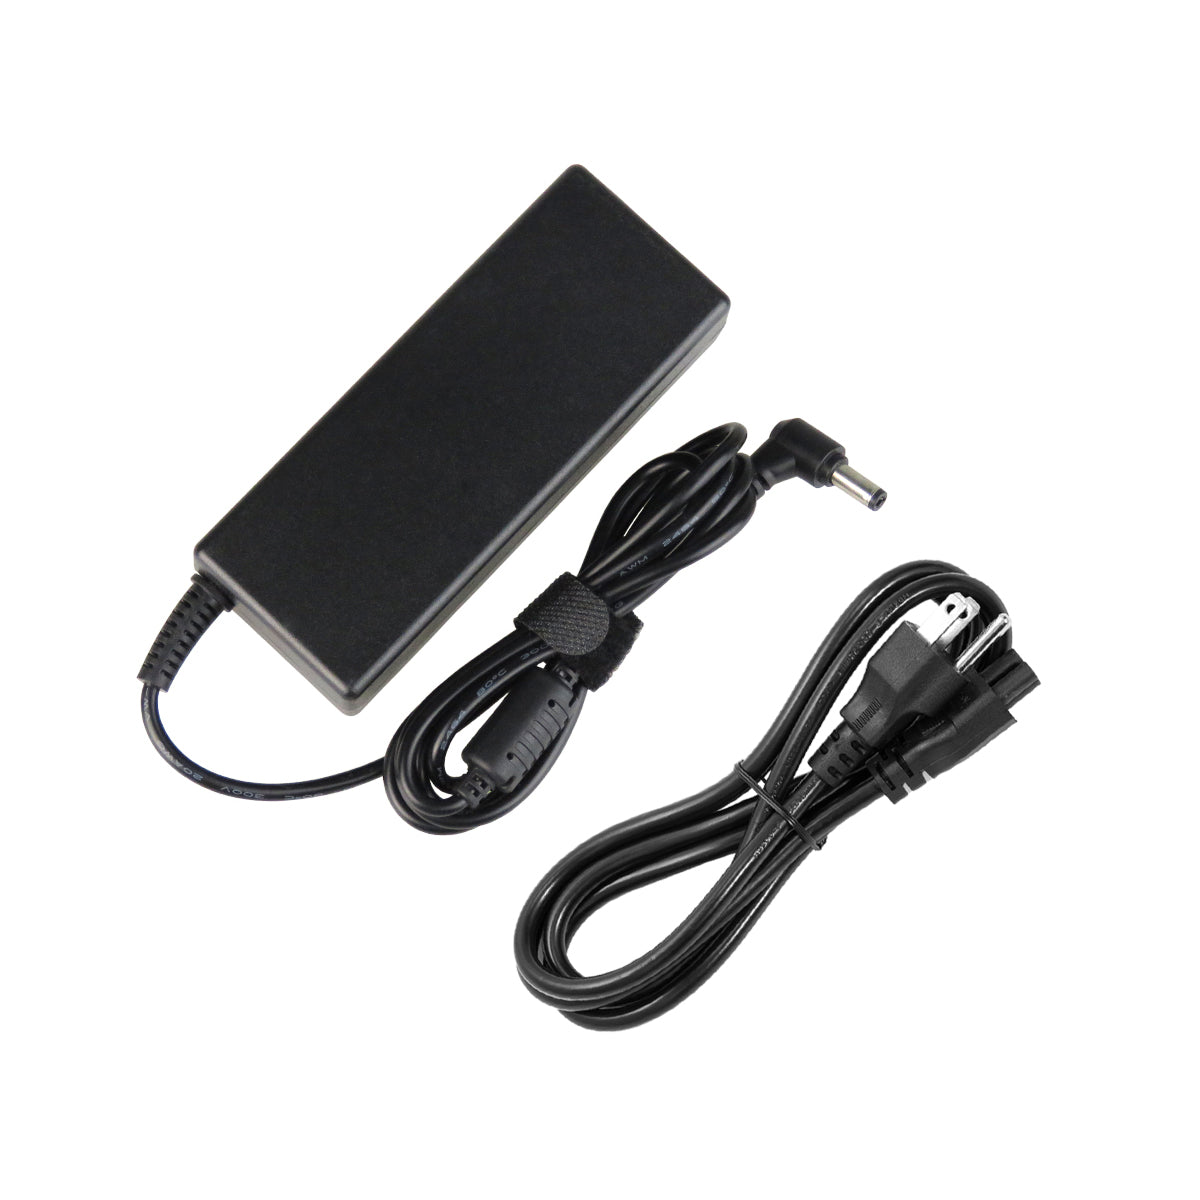 AC Adapter Charger for ASUS N43JF Notebook.